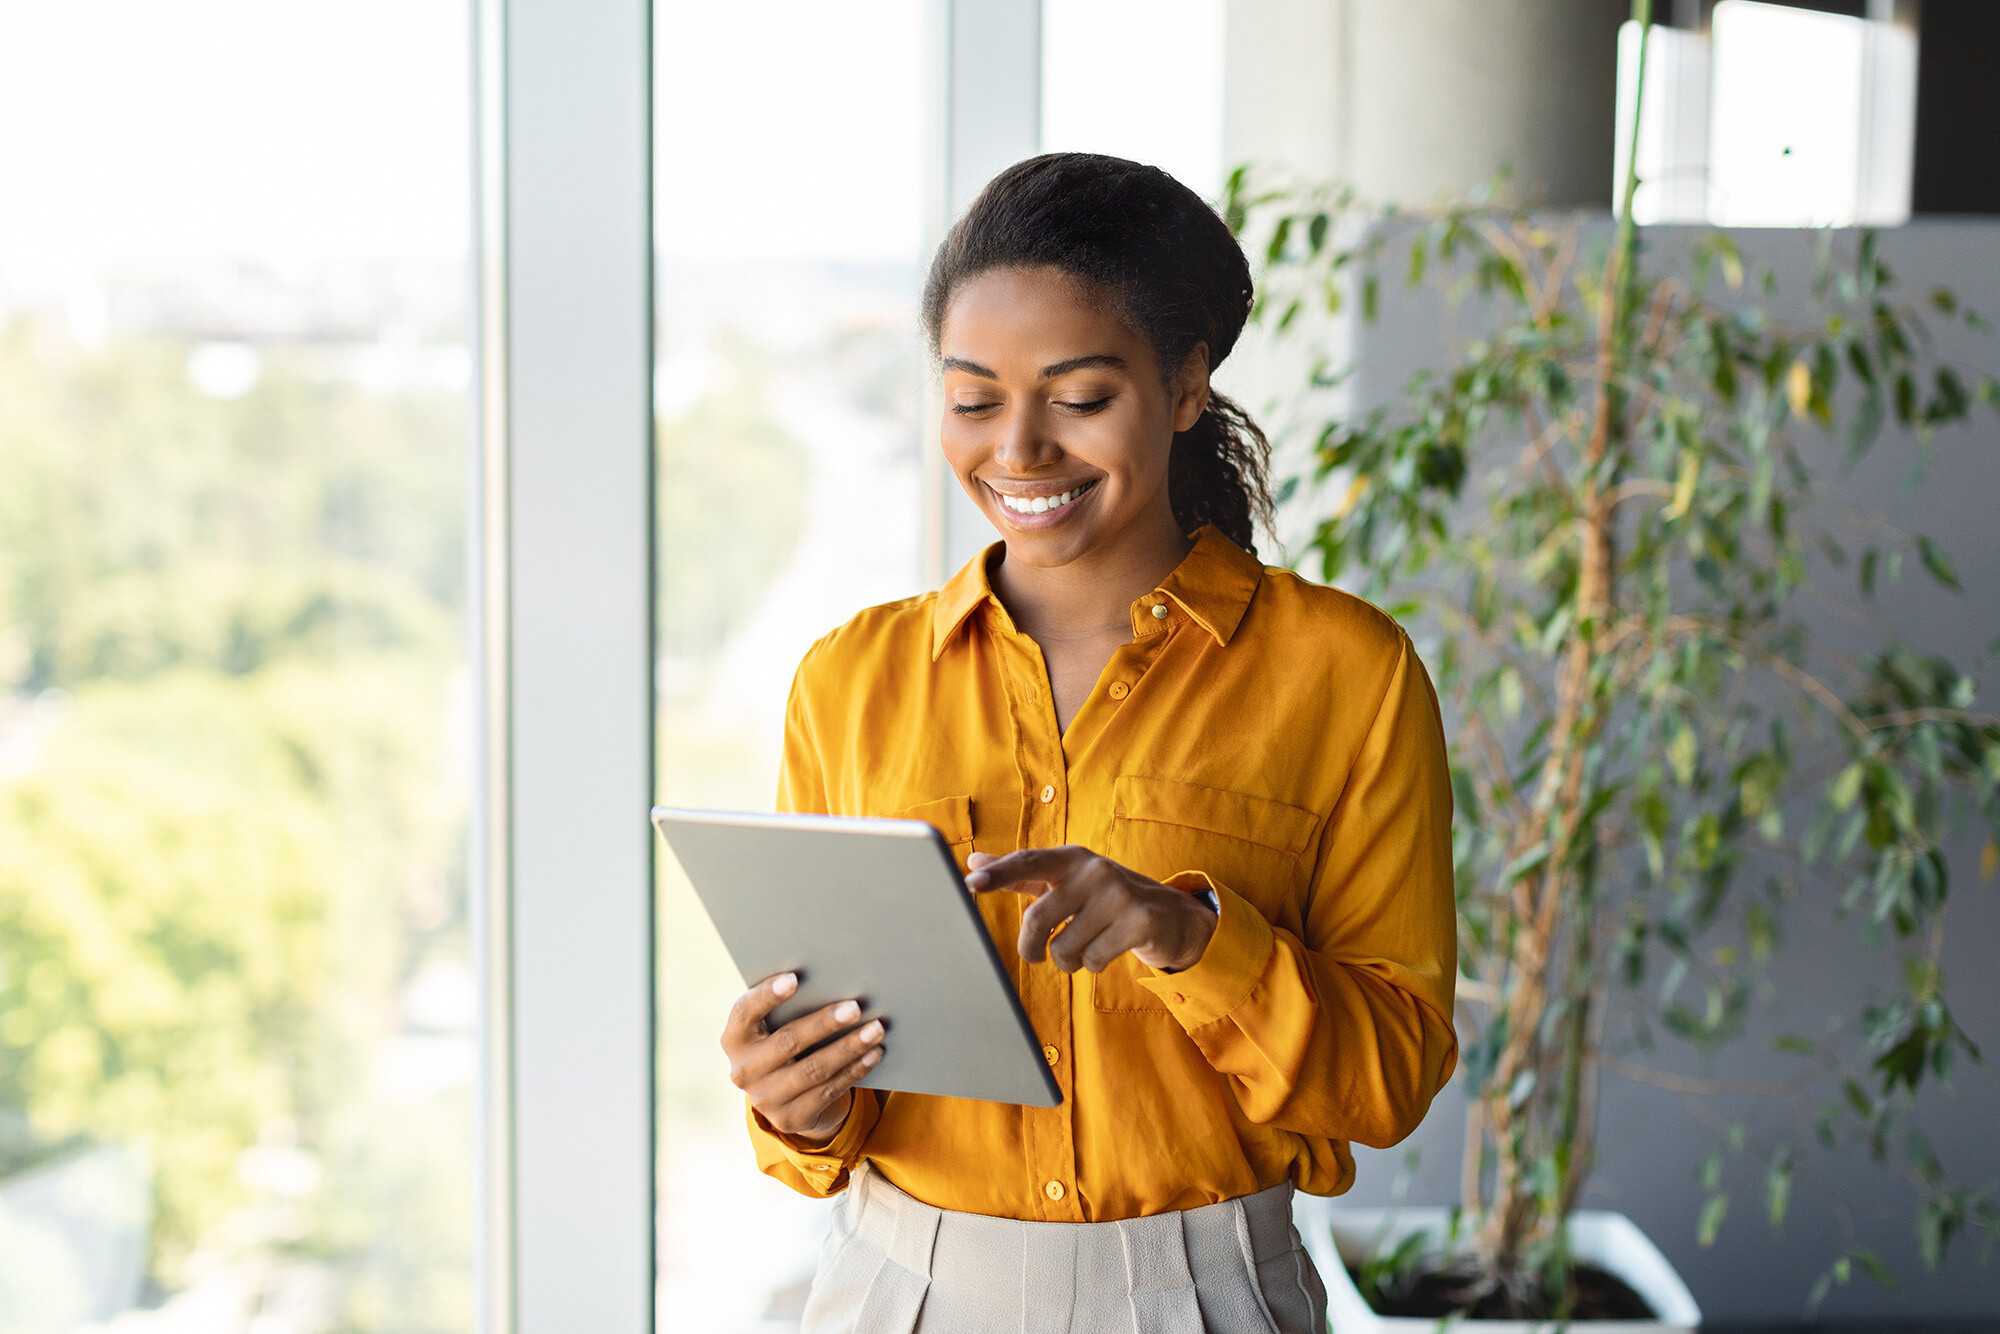 Happy african american woman dressed professionally reading a tablet in an office building